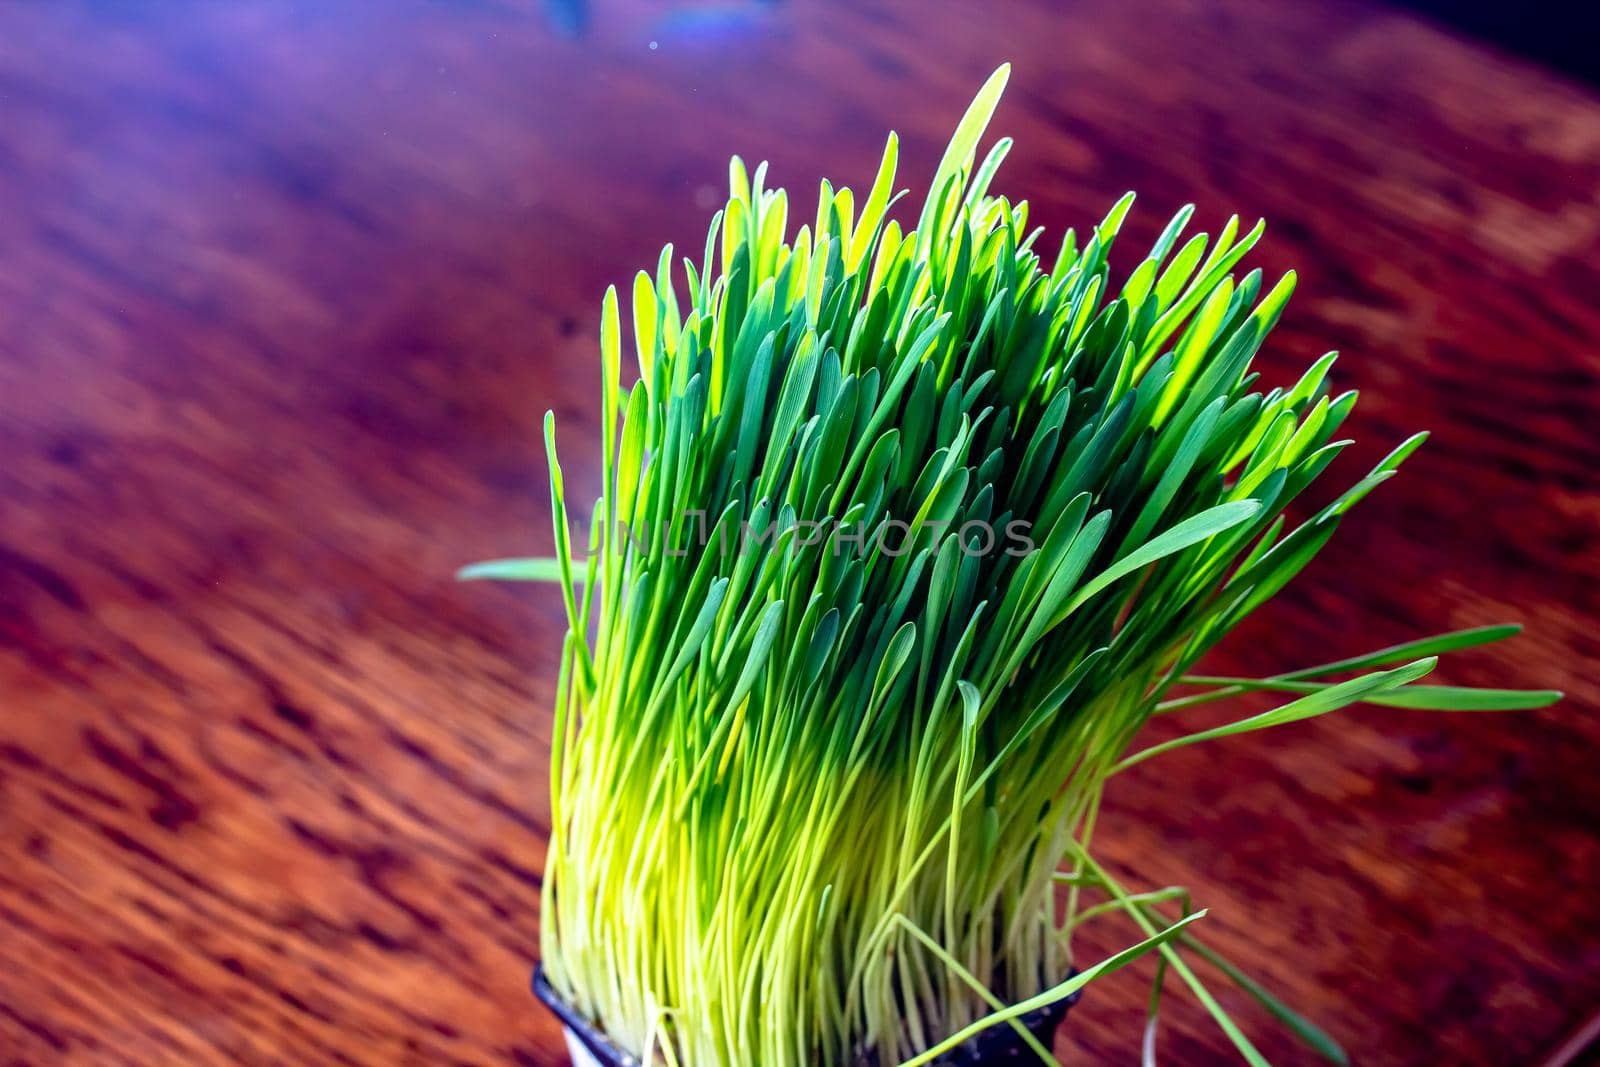 Green cat grass with dew drops grows in a ceramic flower pot in macro. Oat grass plant in terracotta pot. Selective focus on individual blades of grass. Blurred image by Milanchikov